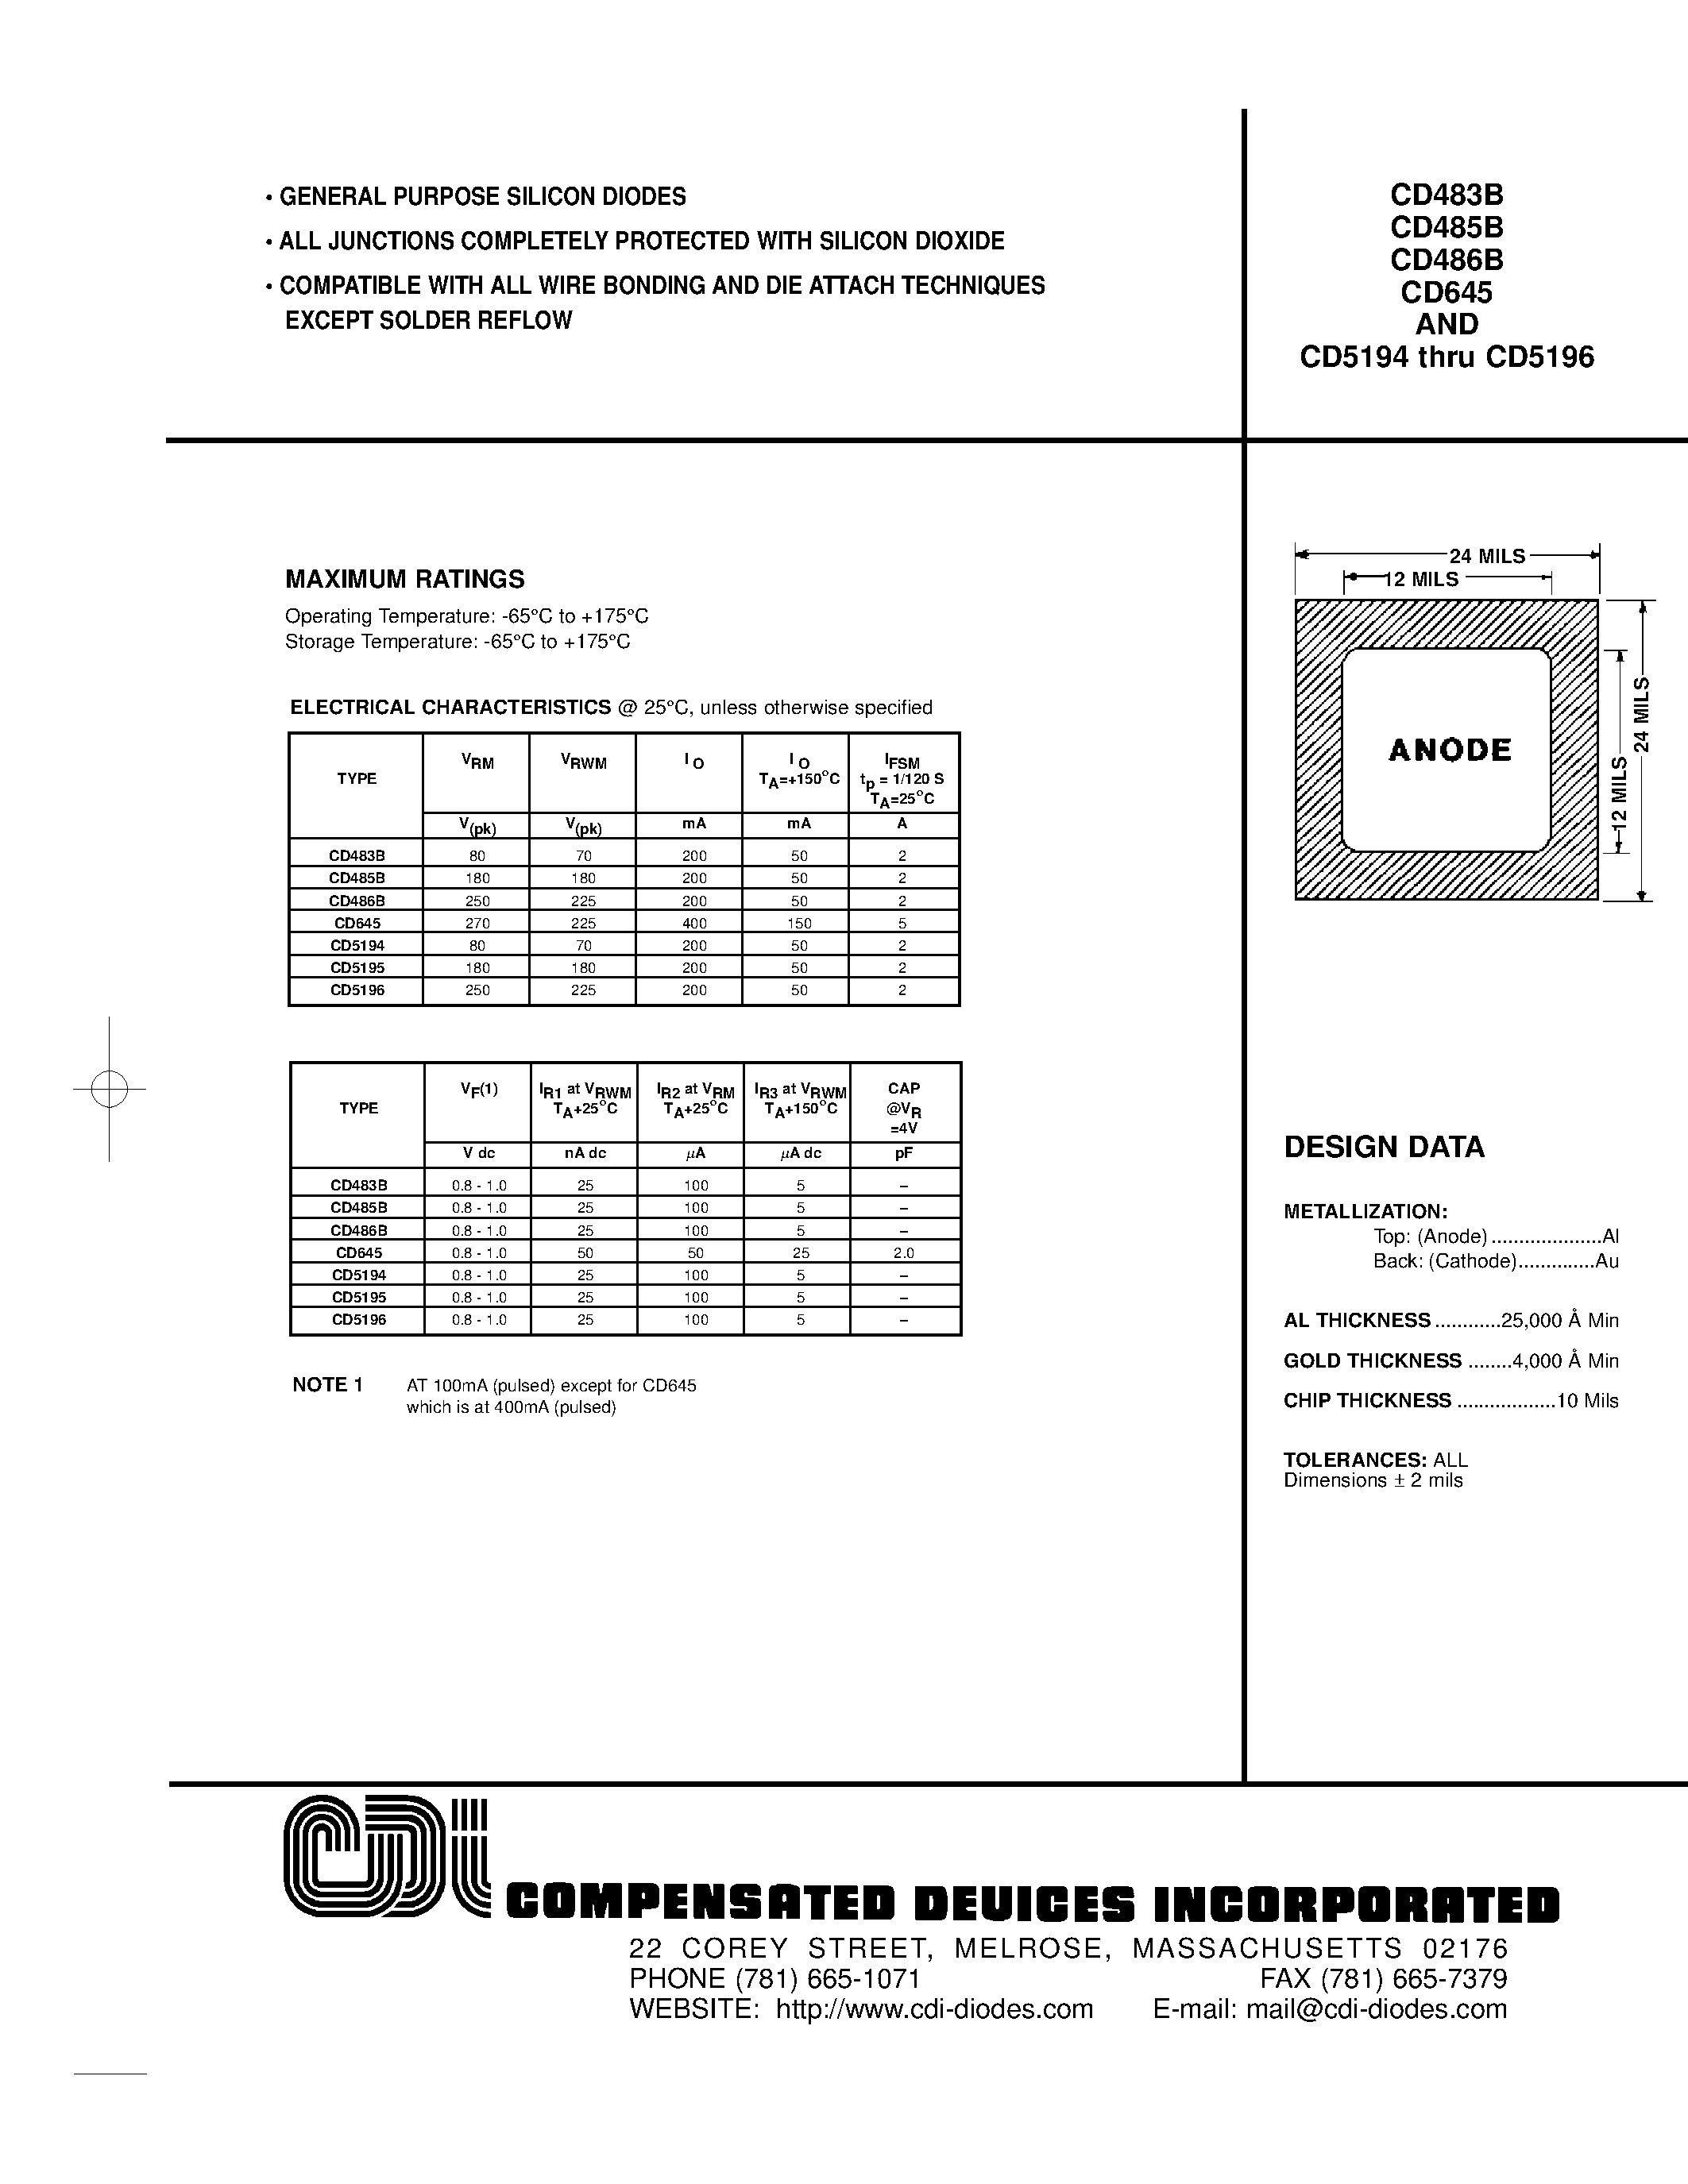 Datasheet CD5194 - GENERAL PURPOSE SILICON DIODES page 1